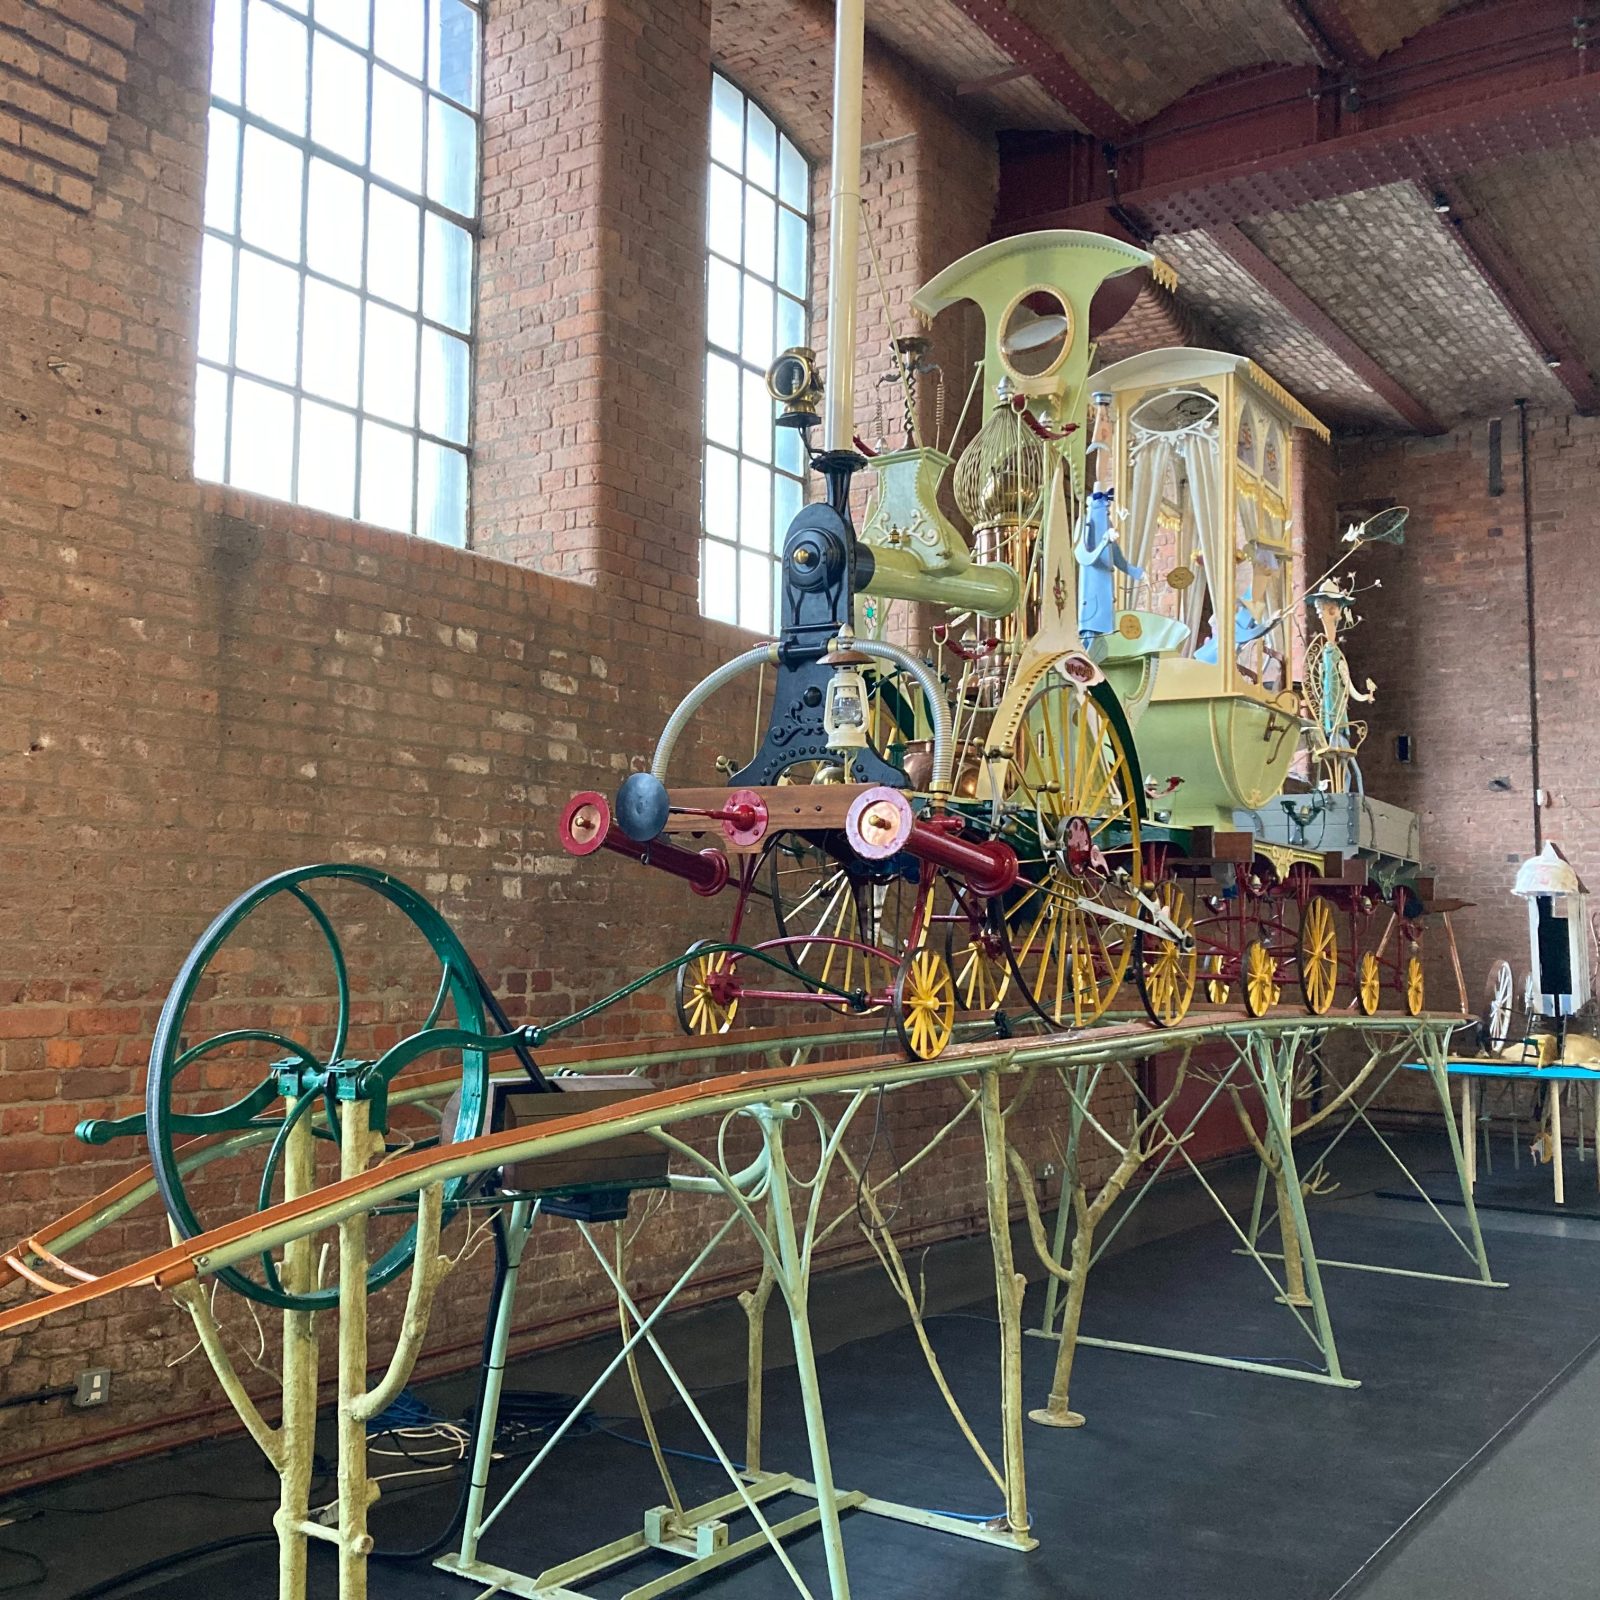 &#8216;Marvellous machines&#8217; and Chitty Chitty Bang Bang &#8216;charm&#8217; have arrived at the Science and Industry Museum, The Manc